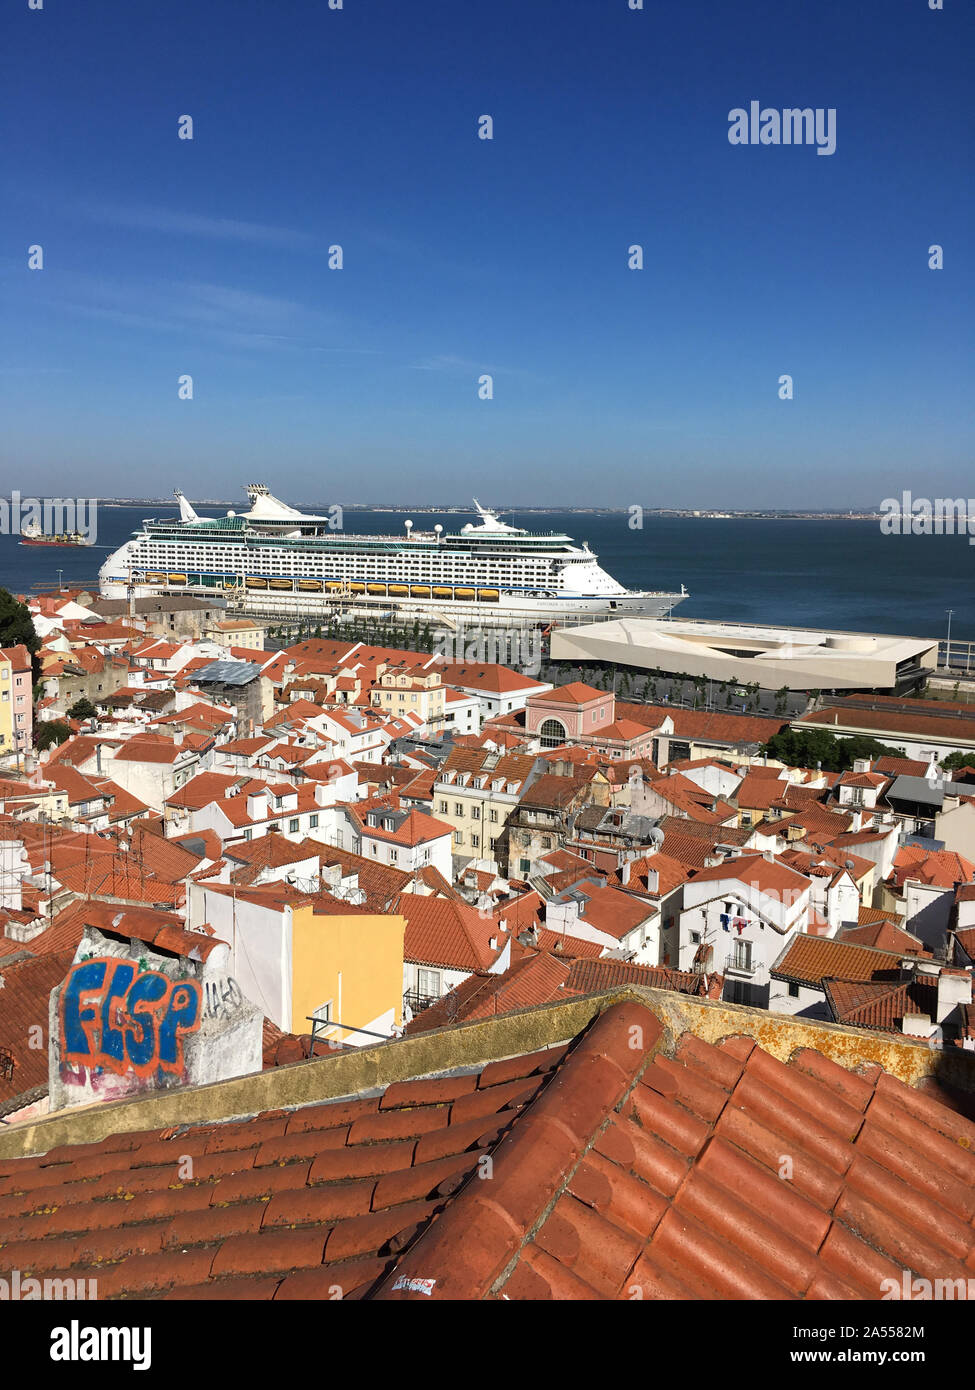 “Explorer of the seas” docked in Lisbon, is a Voyager-class cruise ship owned by Royal Caribbean International and was completed in 2000. Stock Photo